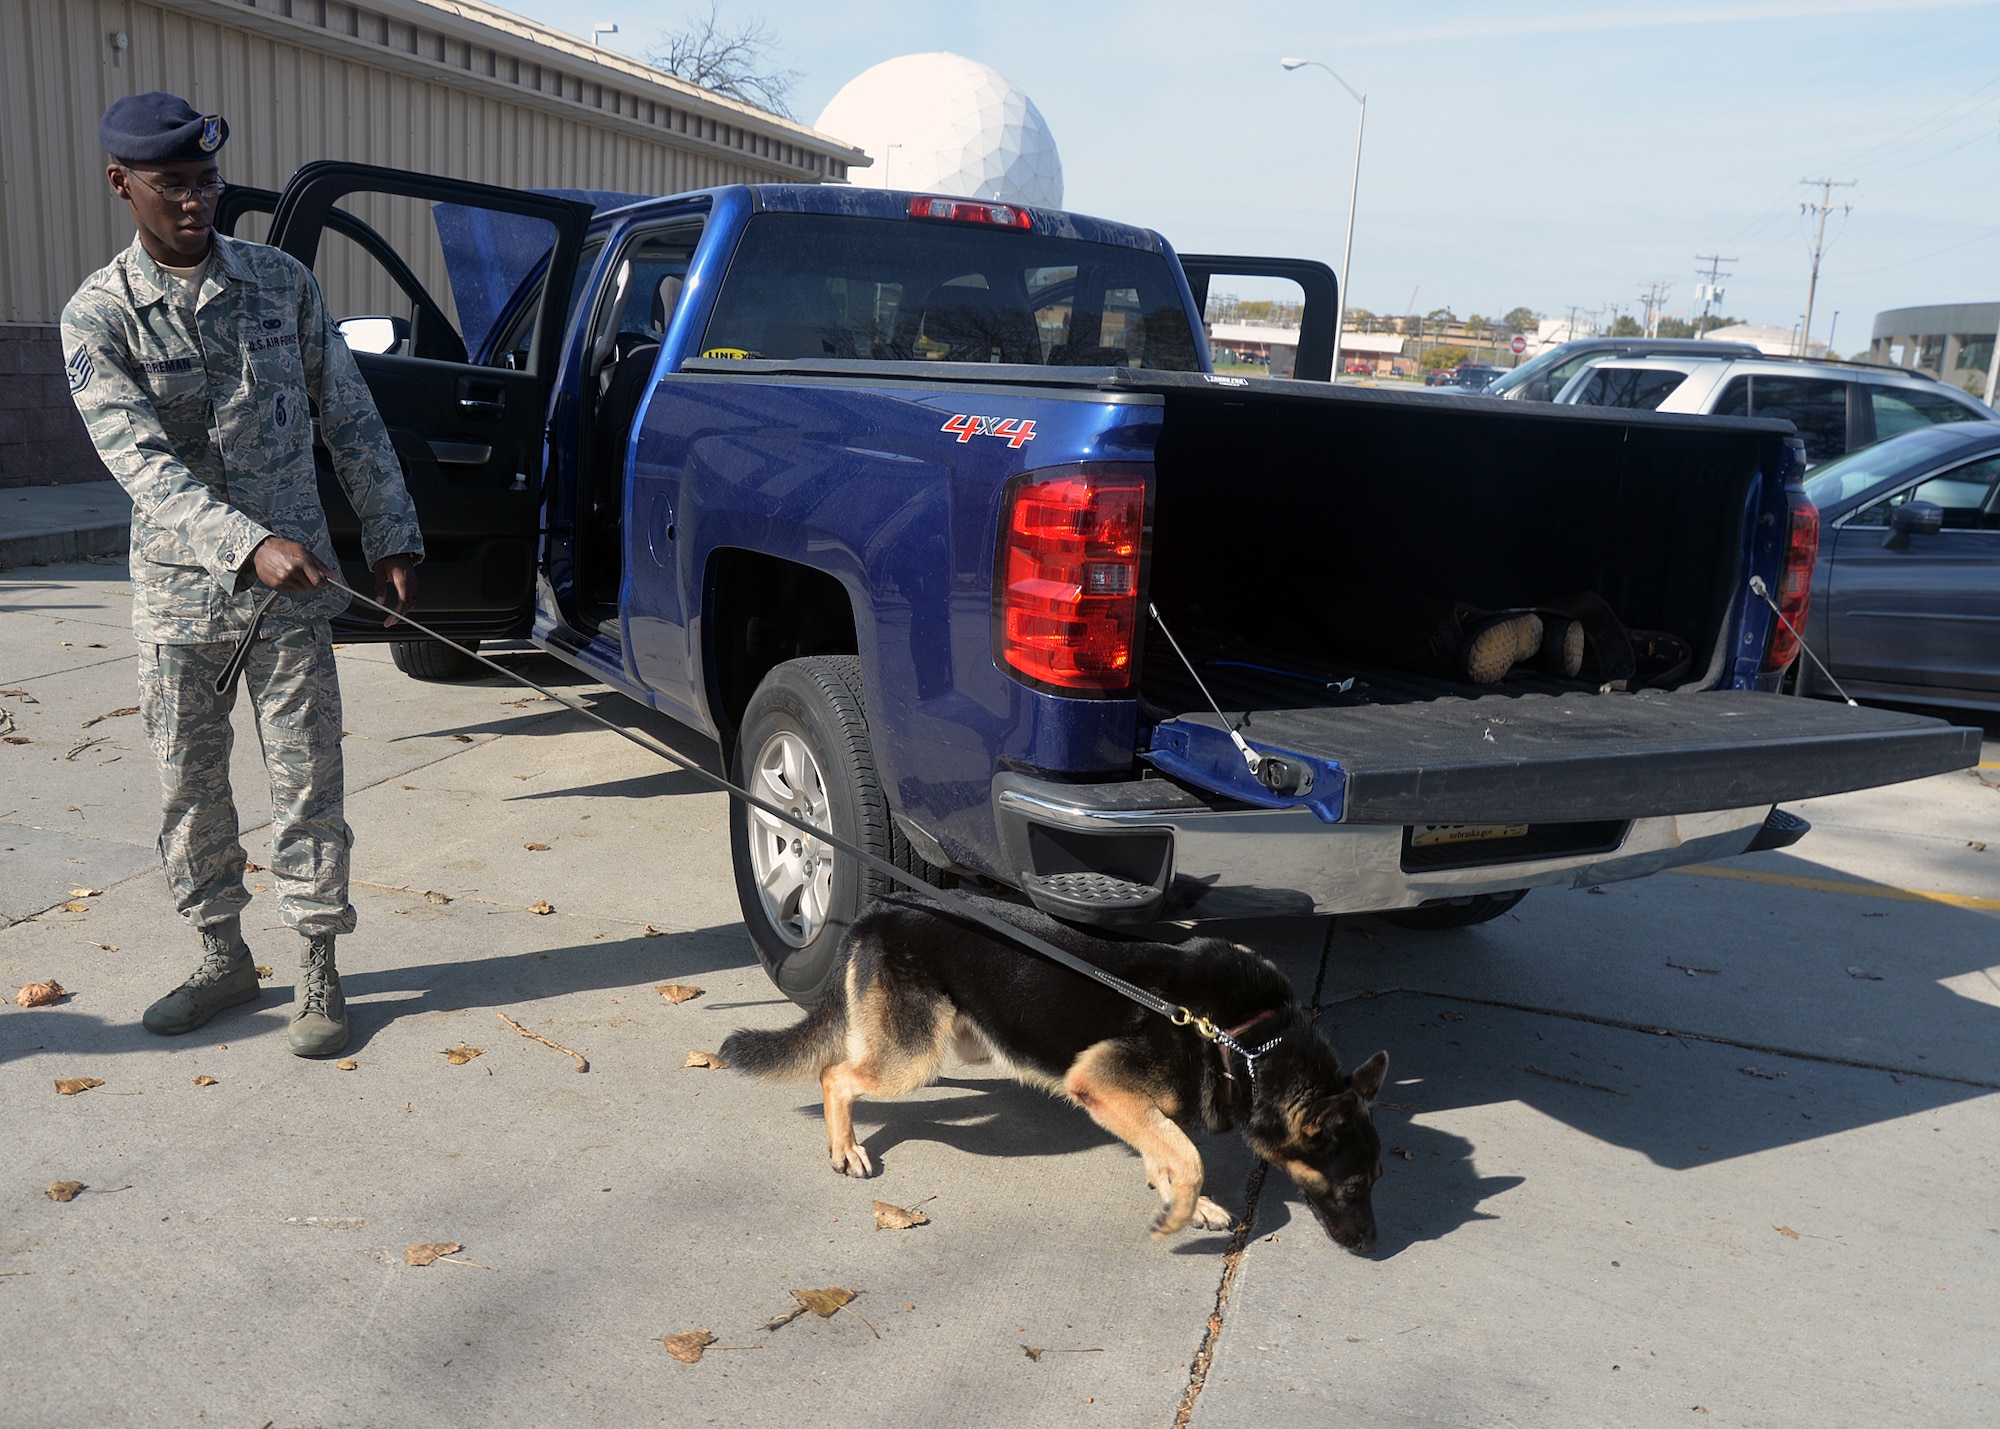 Staff Sgt. Elbert Foreman, 55th Security Force Squadron Military Working Dog handler, and Military Working Dog Rocky, perform a sweep around a vehicle Oct. 21 at the 55th SFS MWD training facility. MWD Rocky is validated in explosion detection. (U.S. Air Force photo by Kendra Williams/Released)